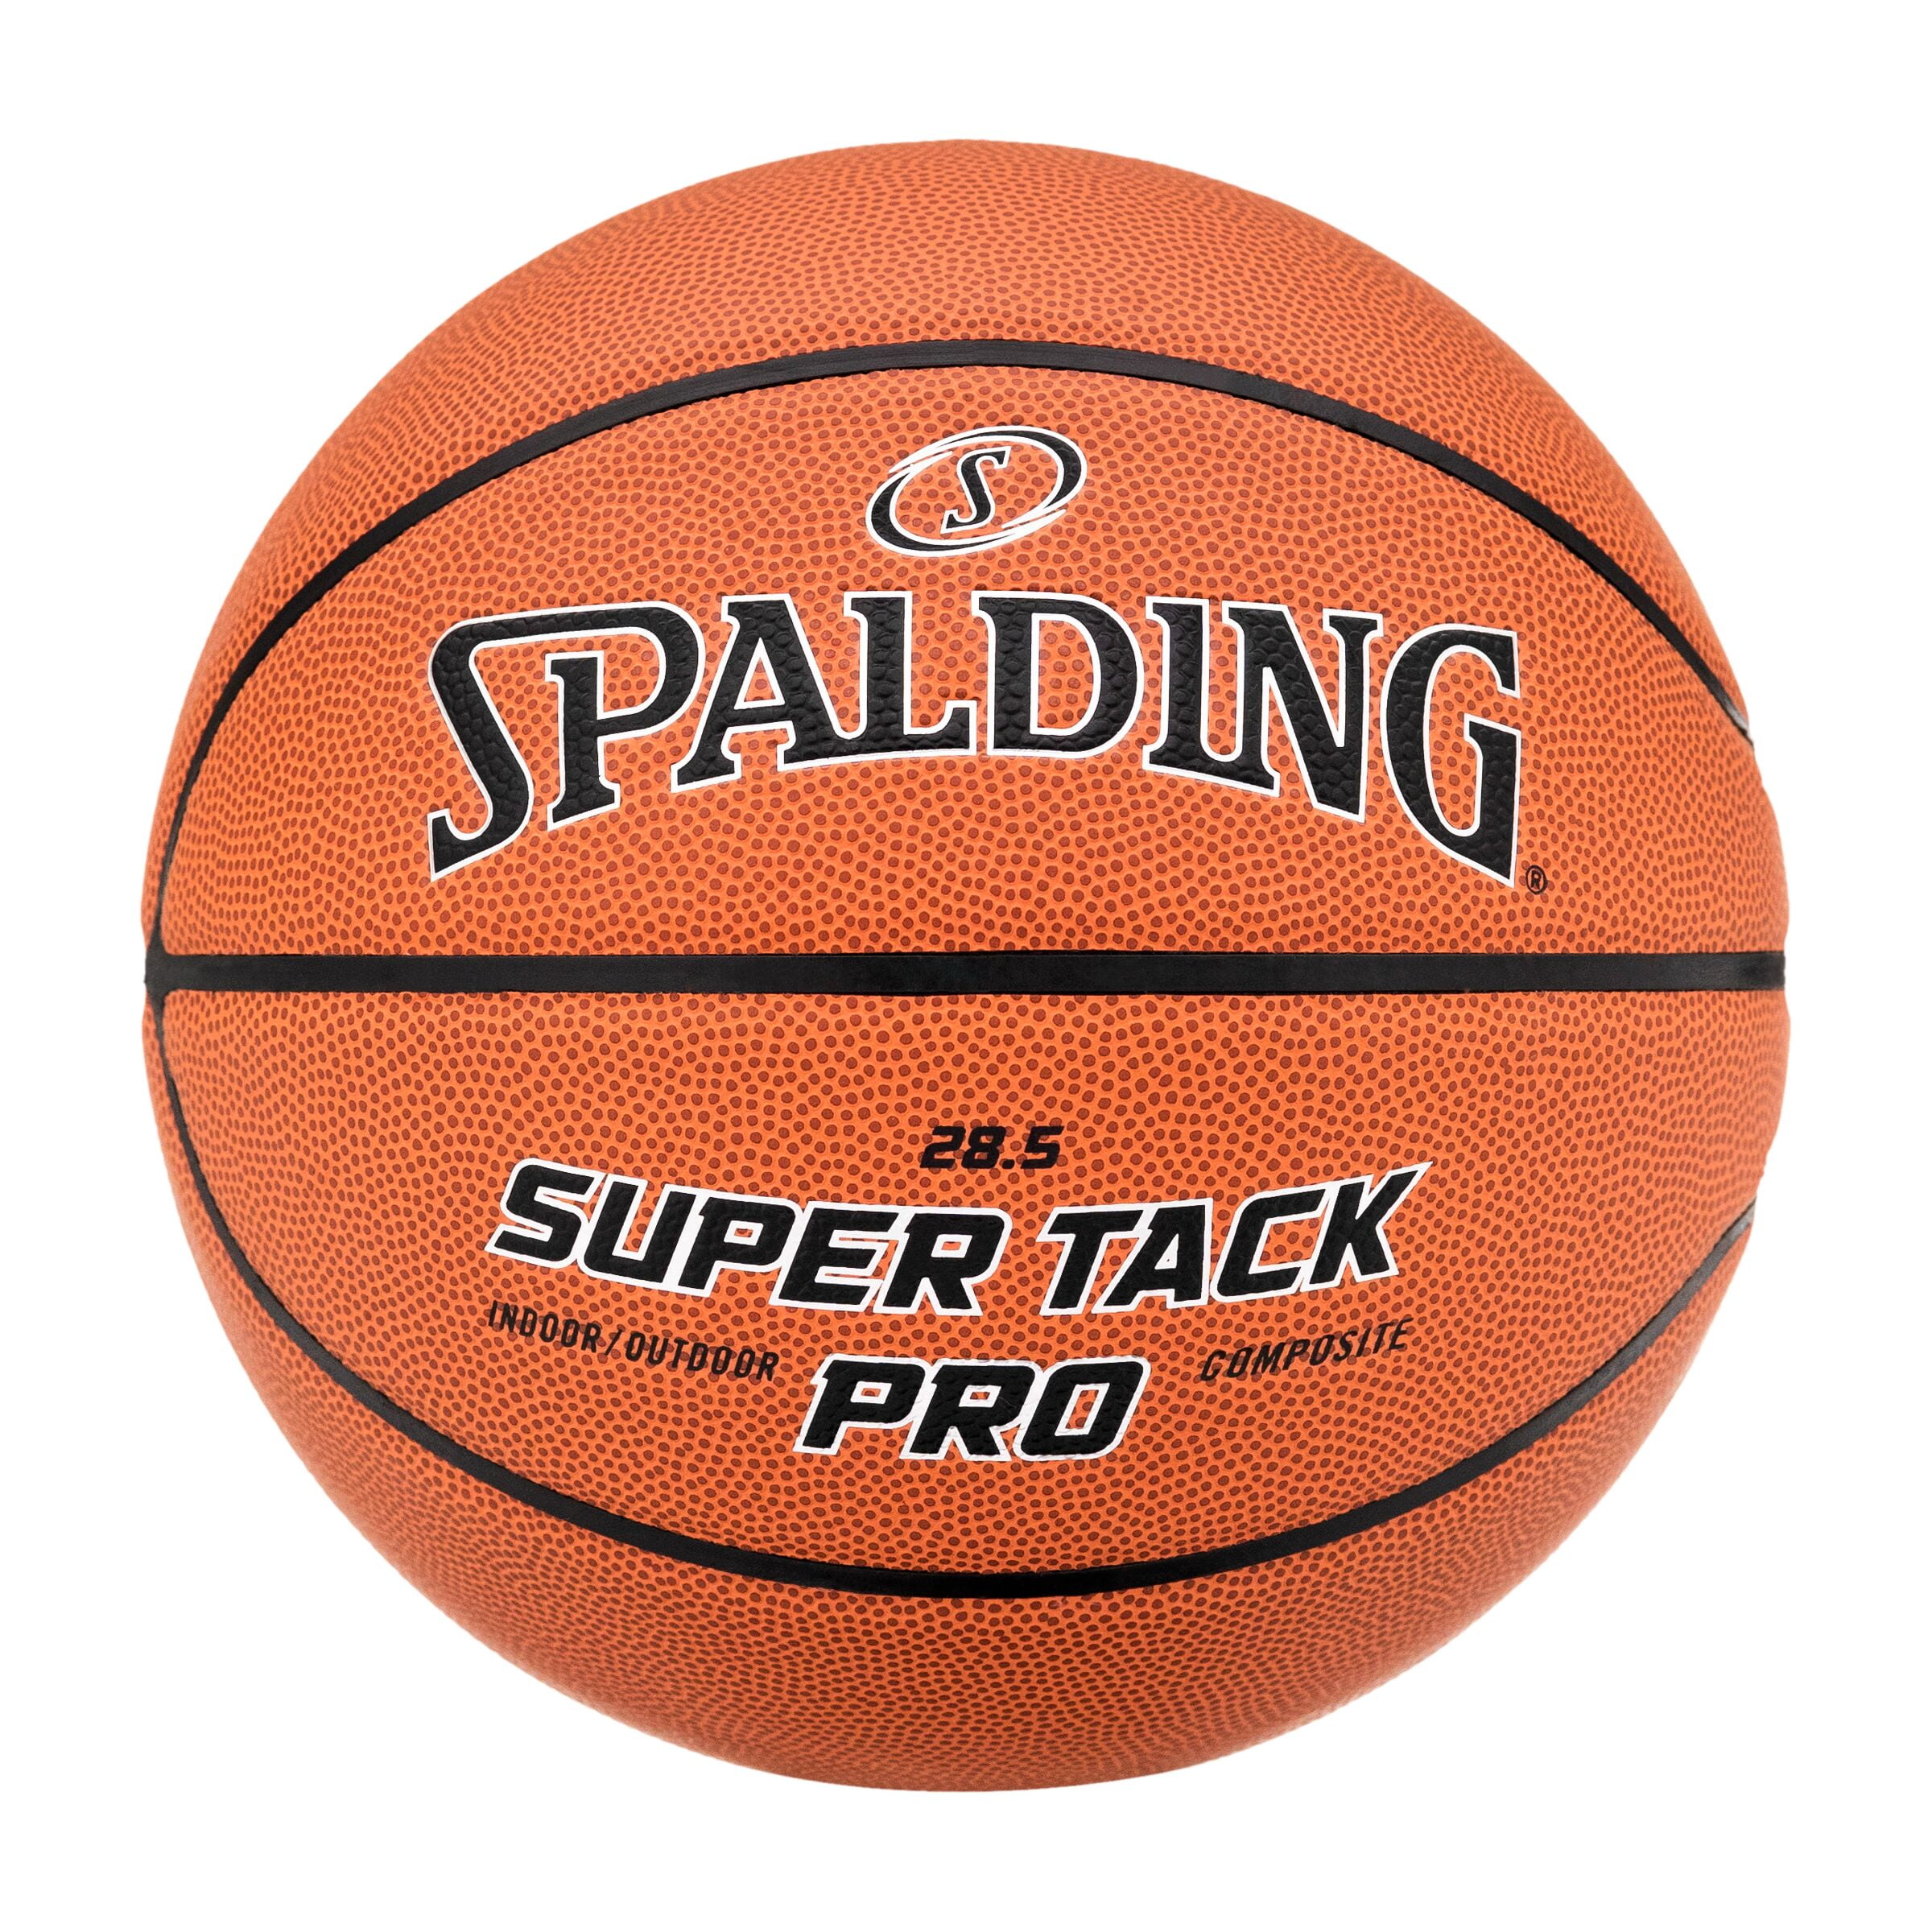 Spalding Super Tack Pro Indoor and Outdoor Basketball- 28.5 In.,